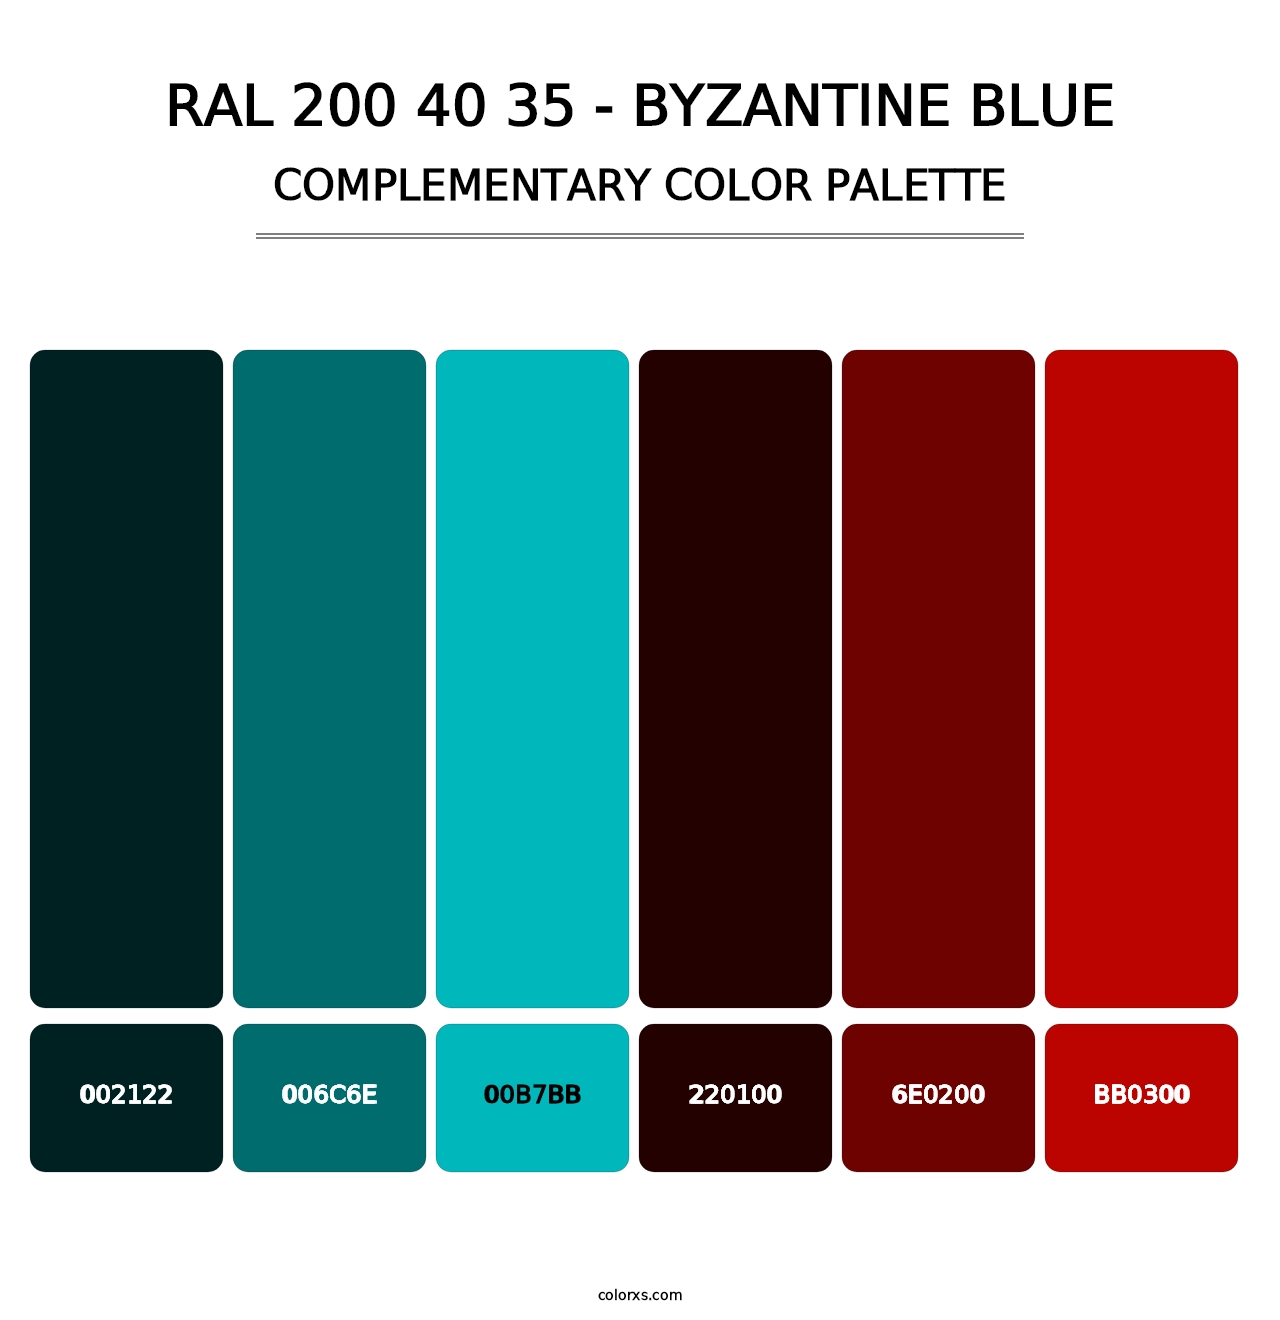 RAL 200 40 35 - Byzantine Blue - Complementary Color Palette